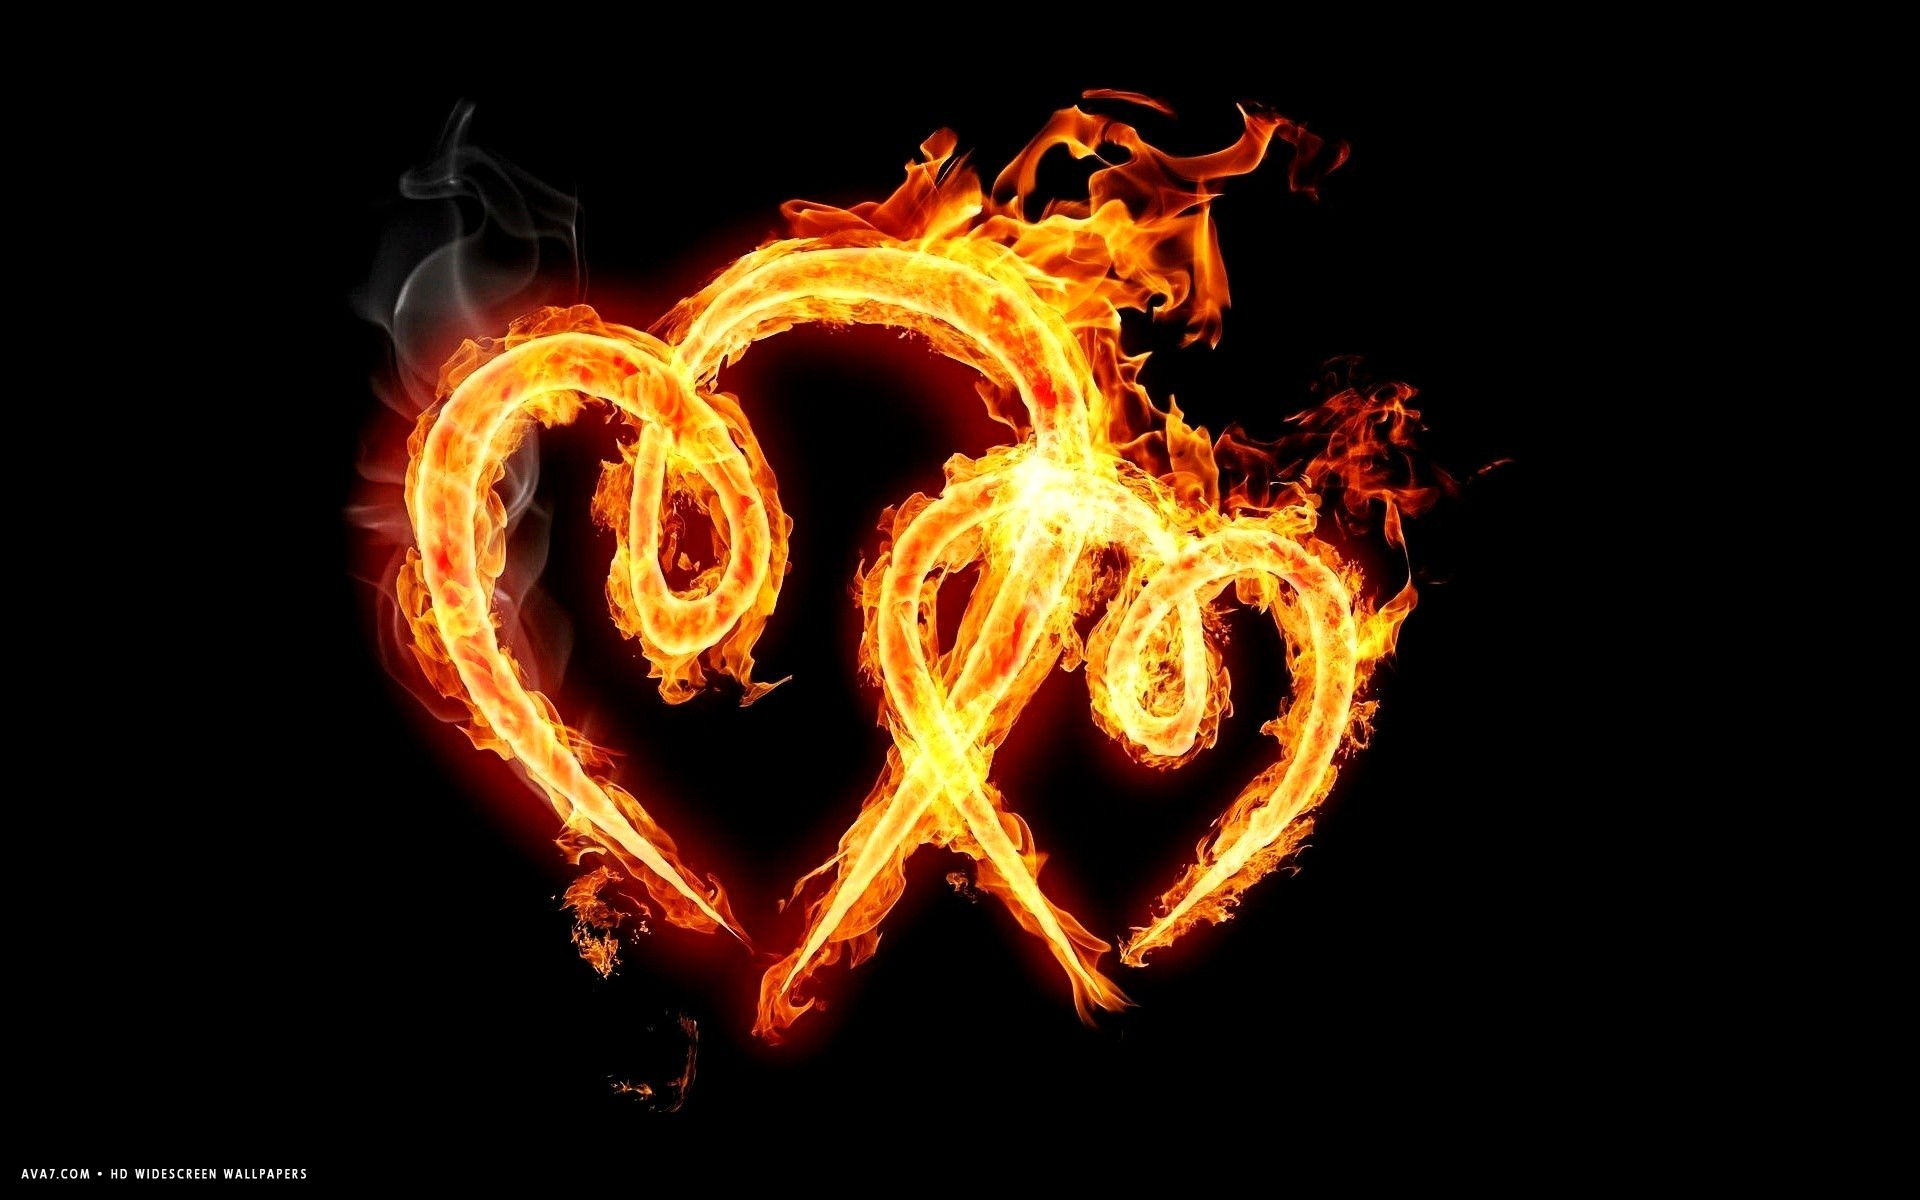 Hearts Two Fire Flames Burning Together Hd Widescreen - Twin Flame Fire Hearts - HD Wallpaper 